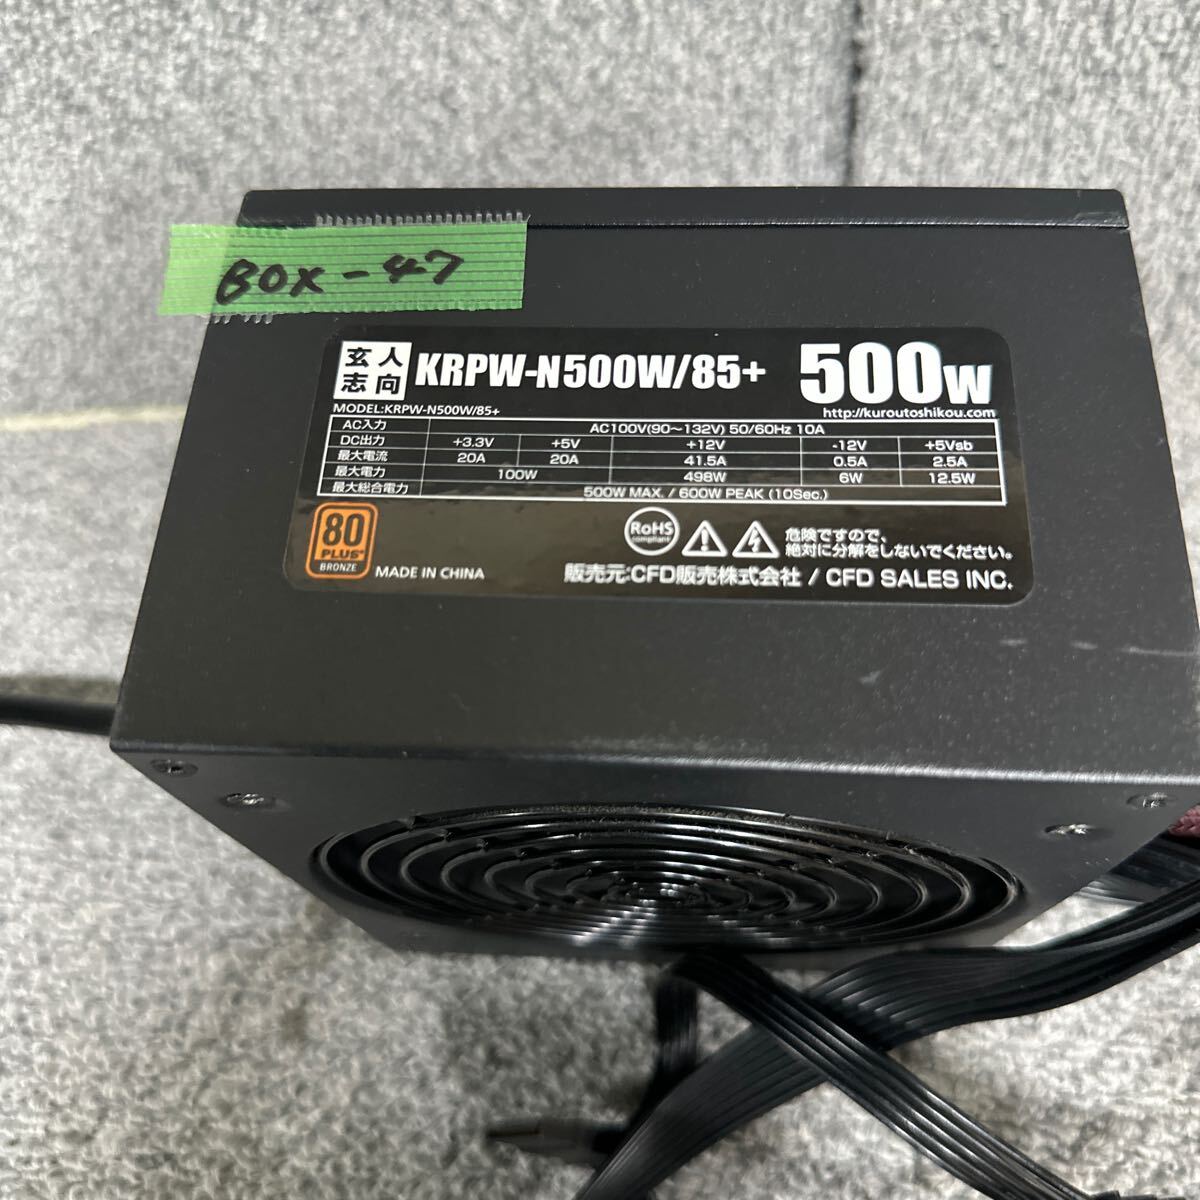 GK super-discount BOX-47 PC power supply BOX. person intention KRPW-N500W/85+ 500W 80PLUS BRONZE power supply unit voltage has confirmed secondhand goods 